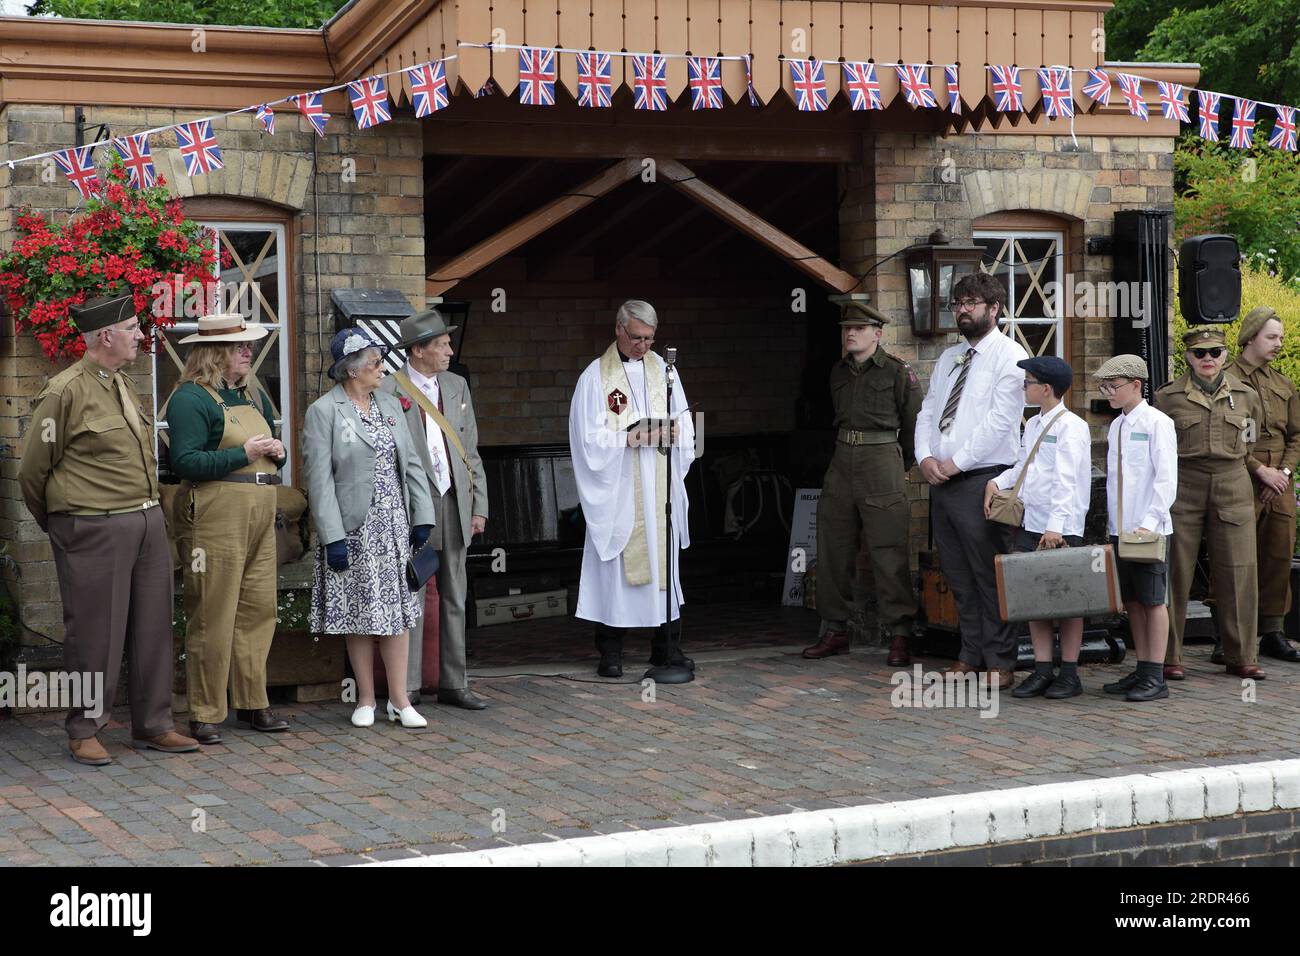 A mock religious service is undertaken on the platform of Arley Station in Shropshire. Stock Photo